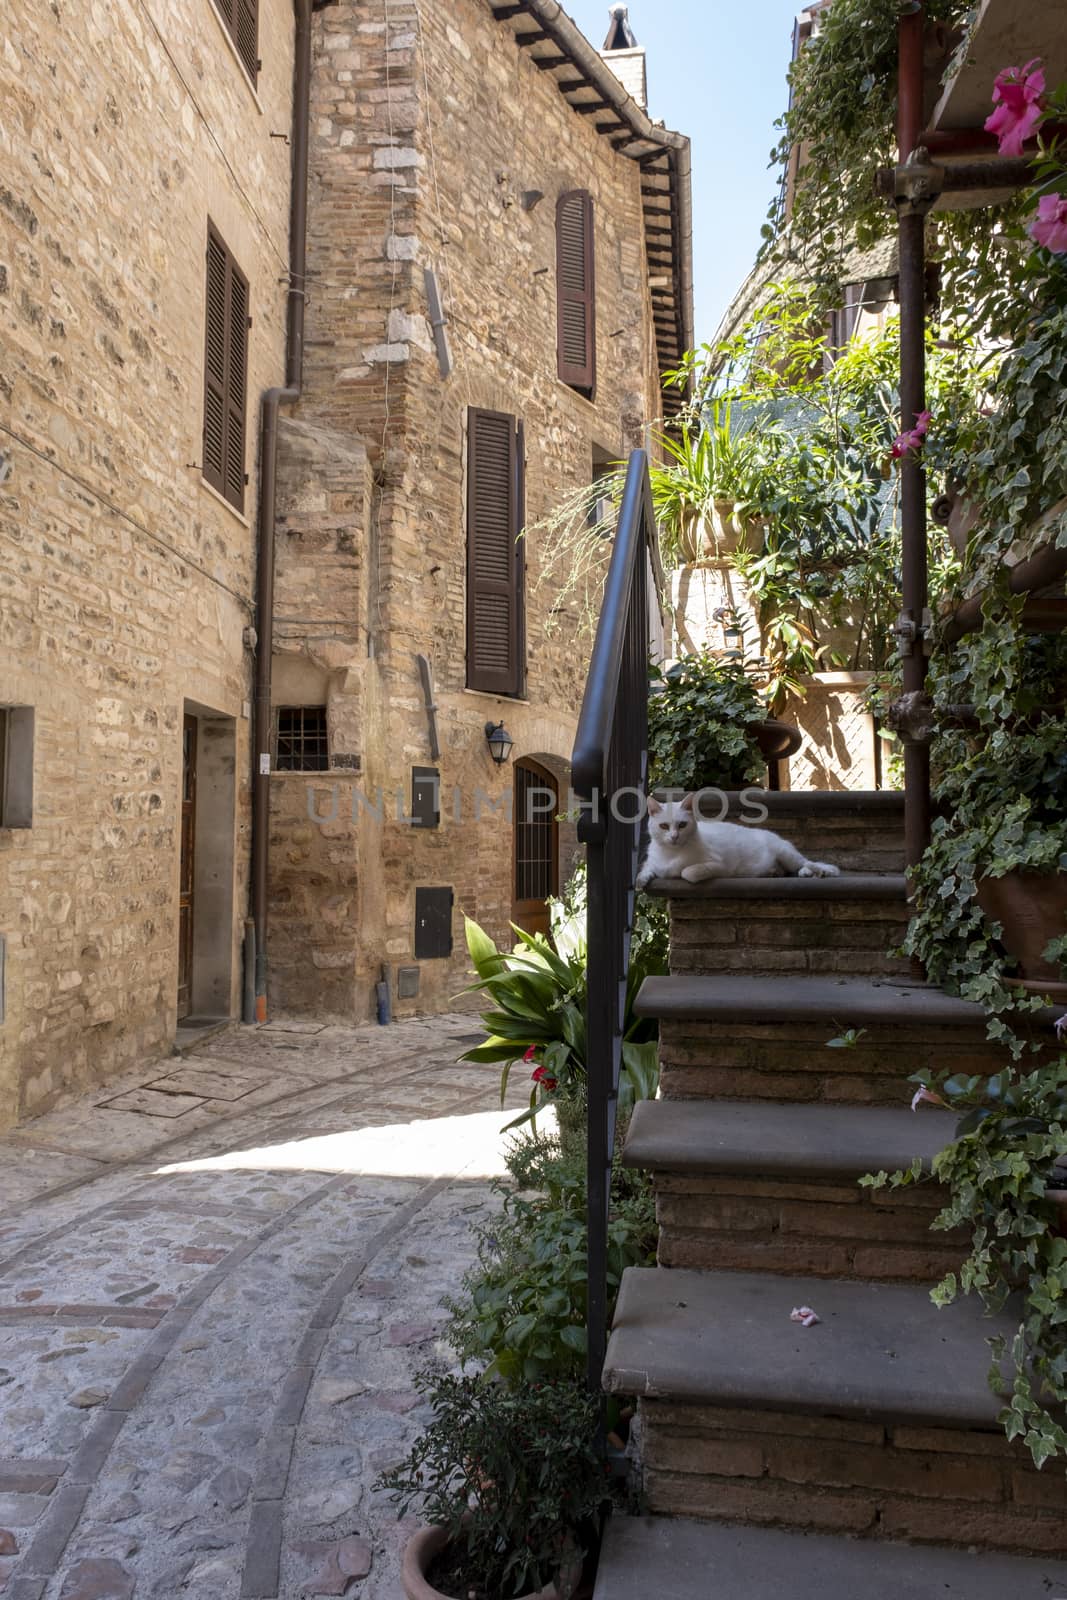 A white cat in an alley in a typical medieval Italian village during a summer day.